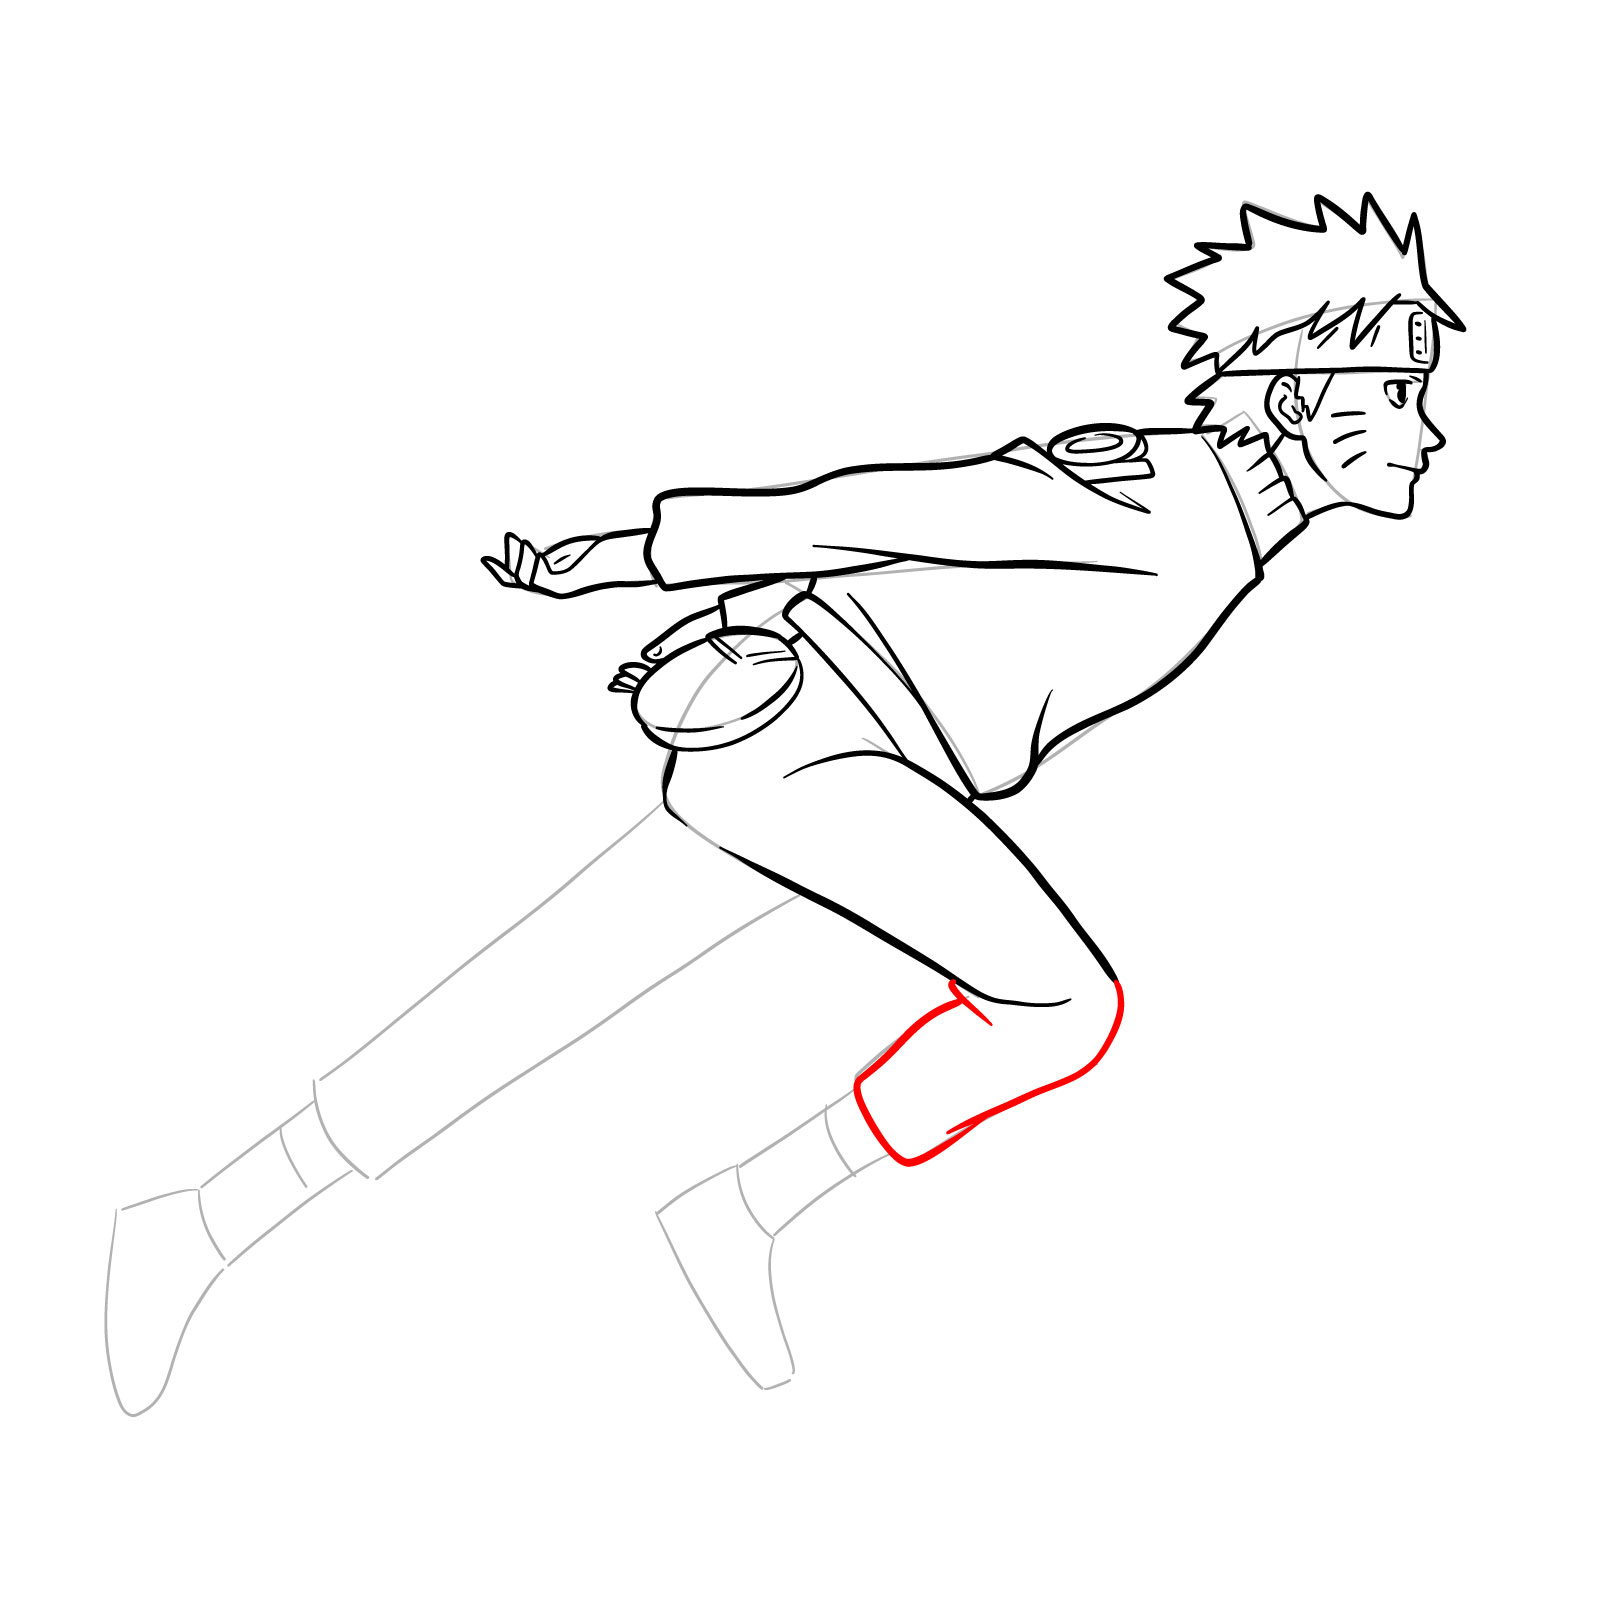 How to draw Naruto running - step 28